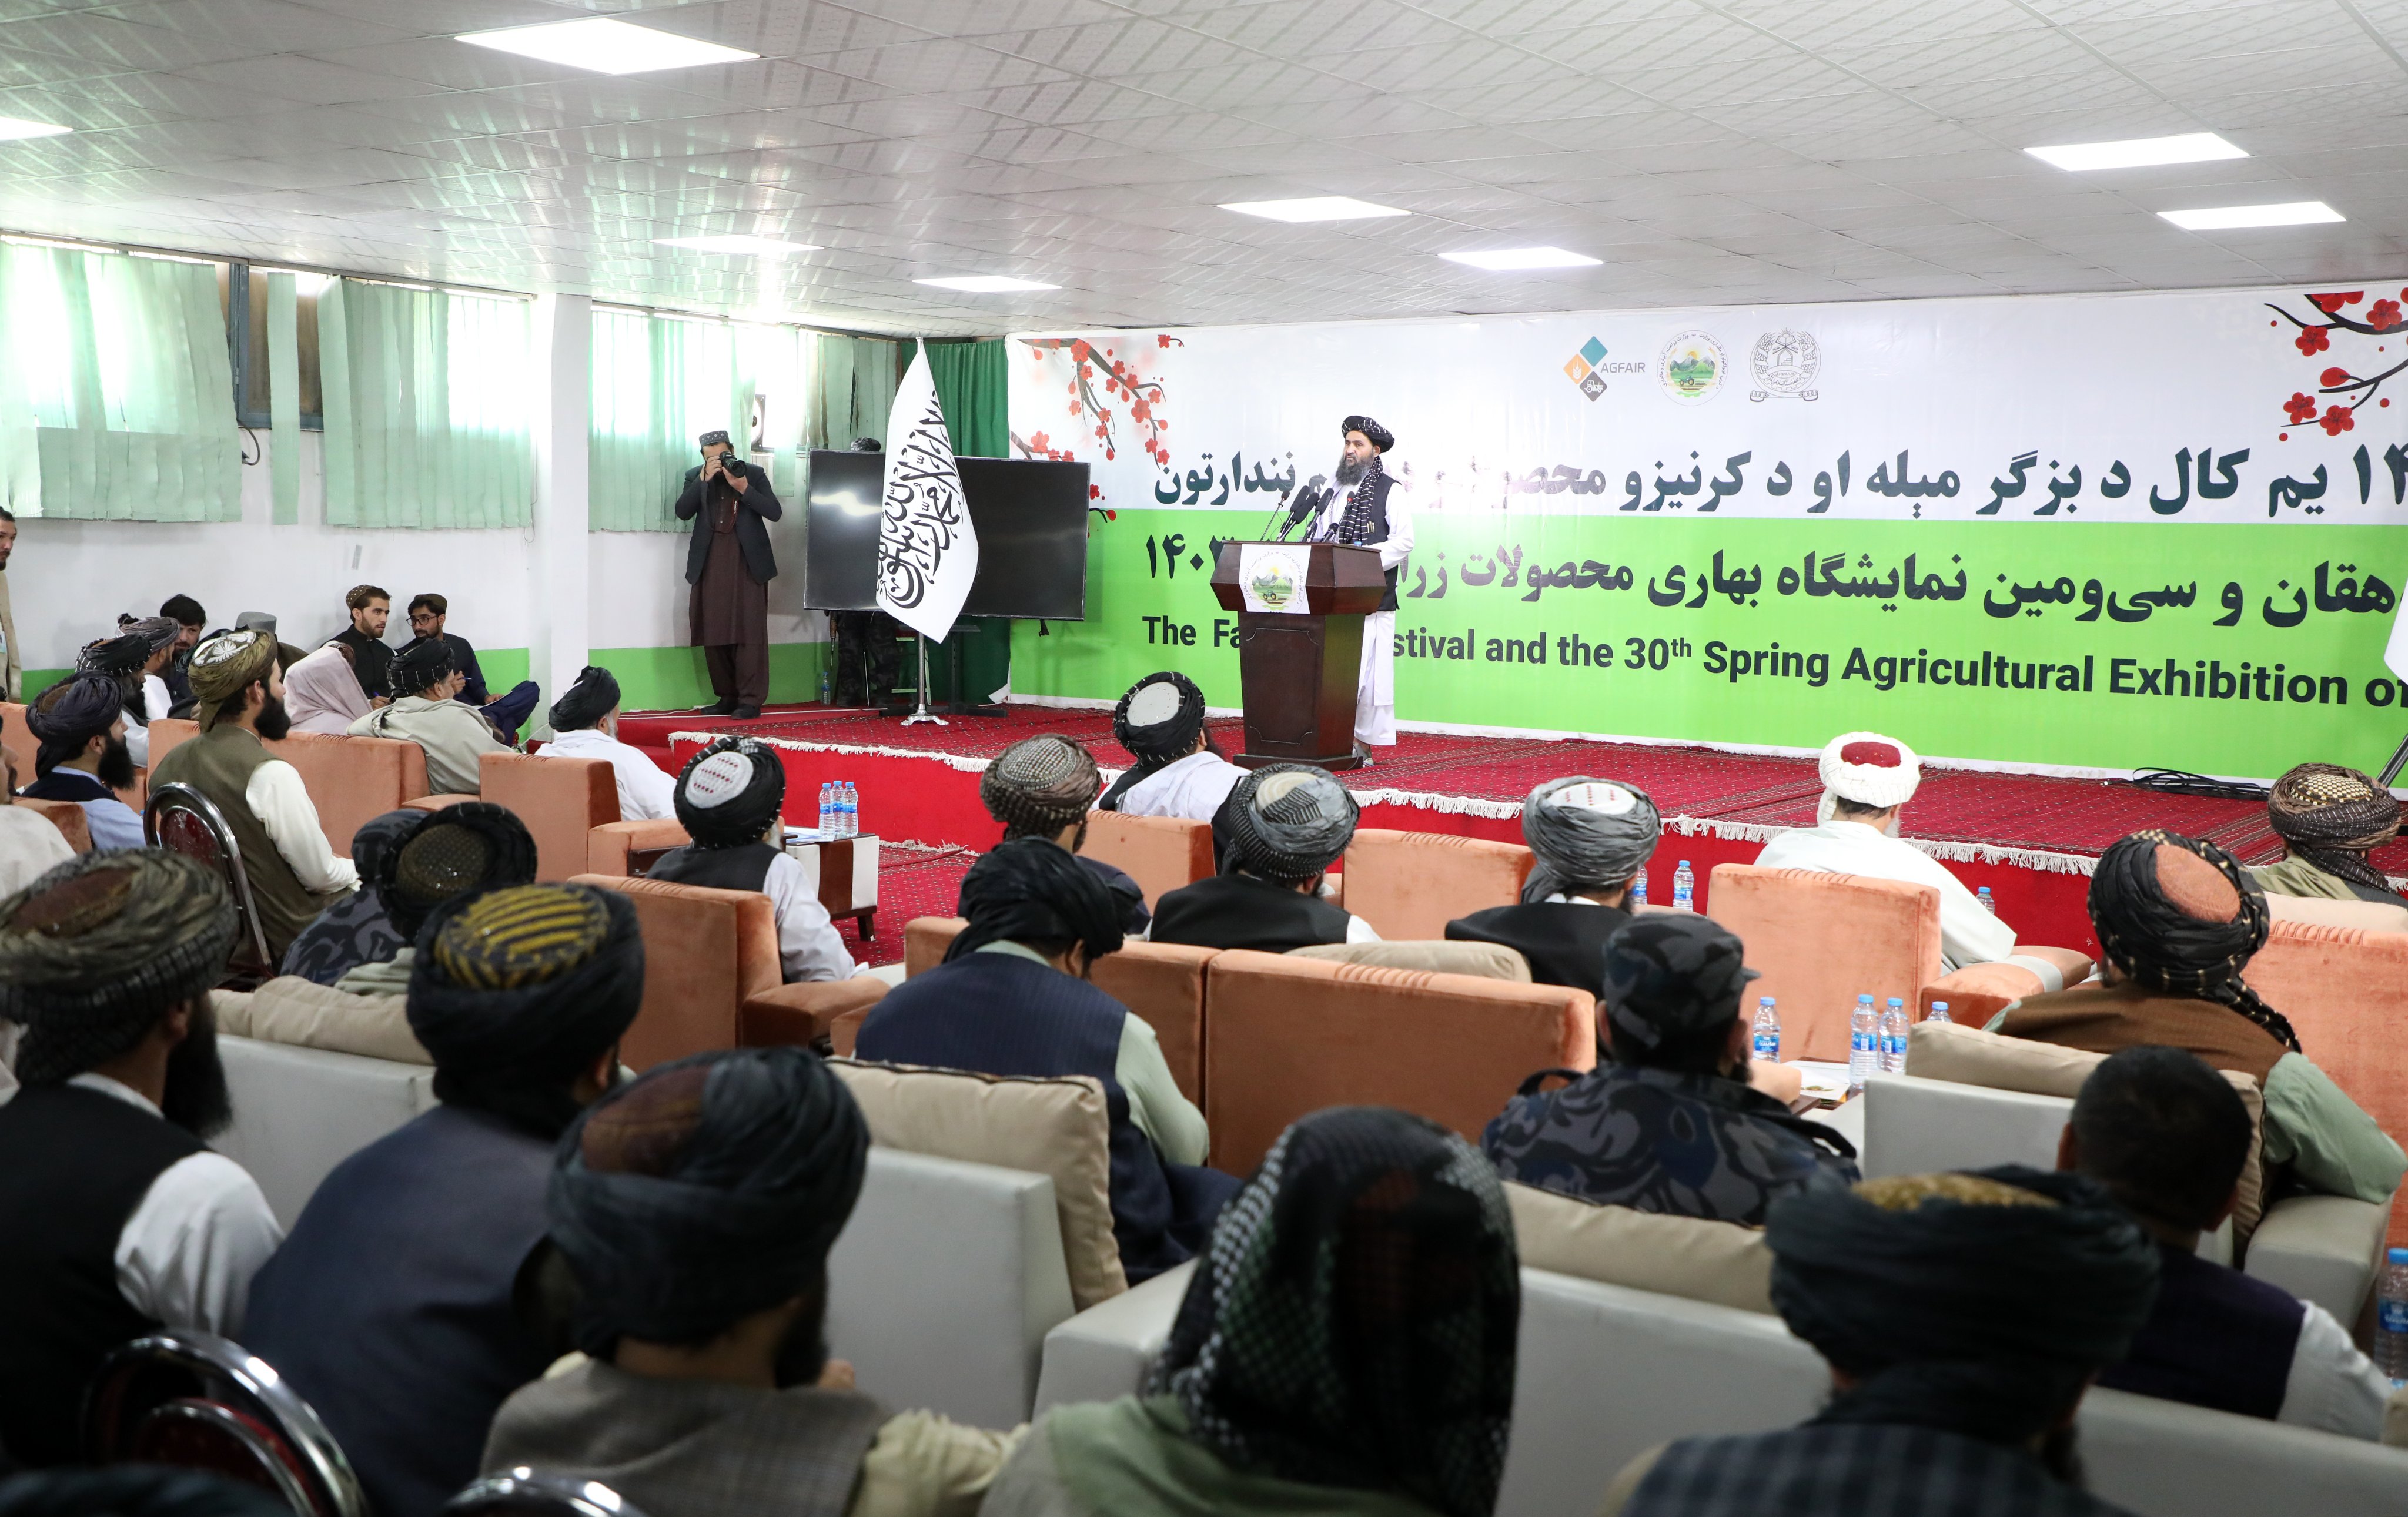 Exhibition of agriculture products inaugurated in Kabul